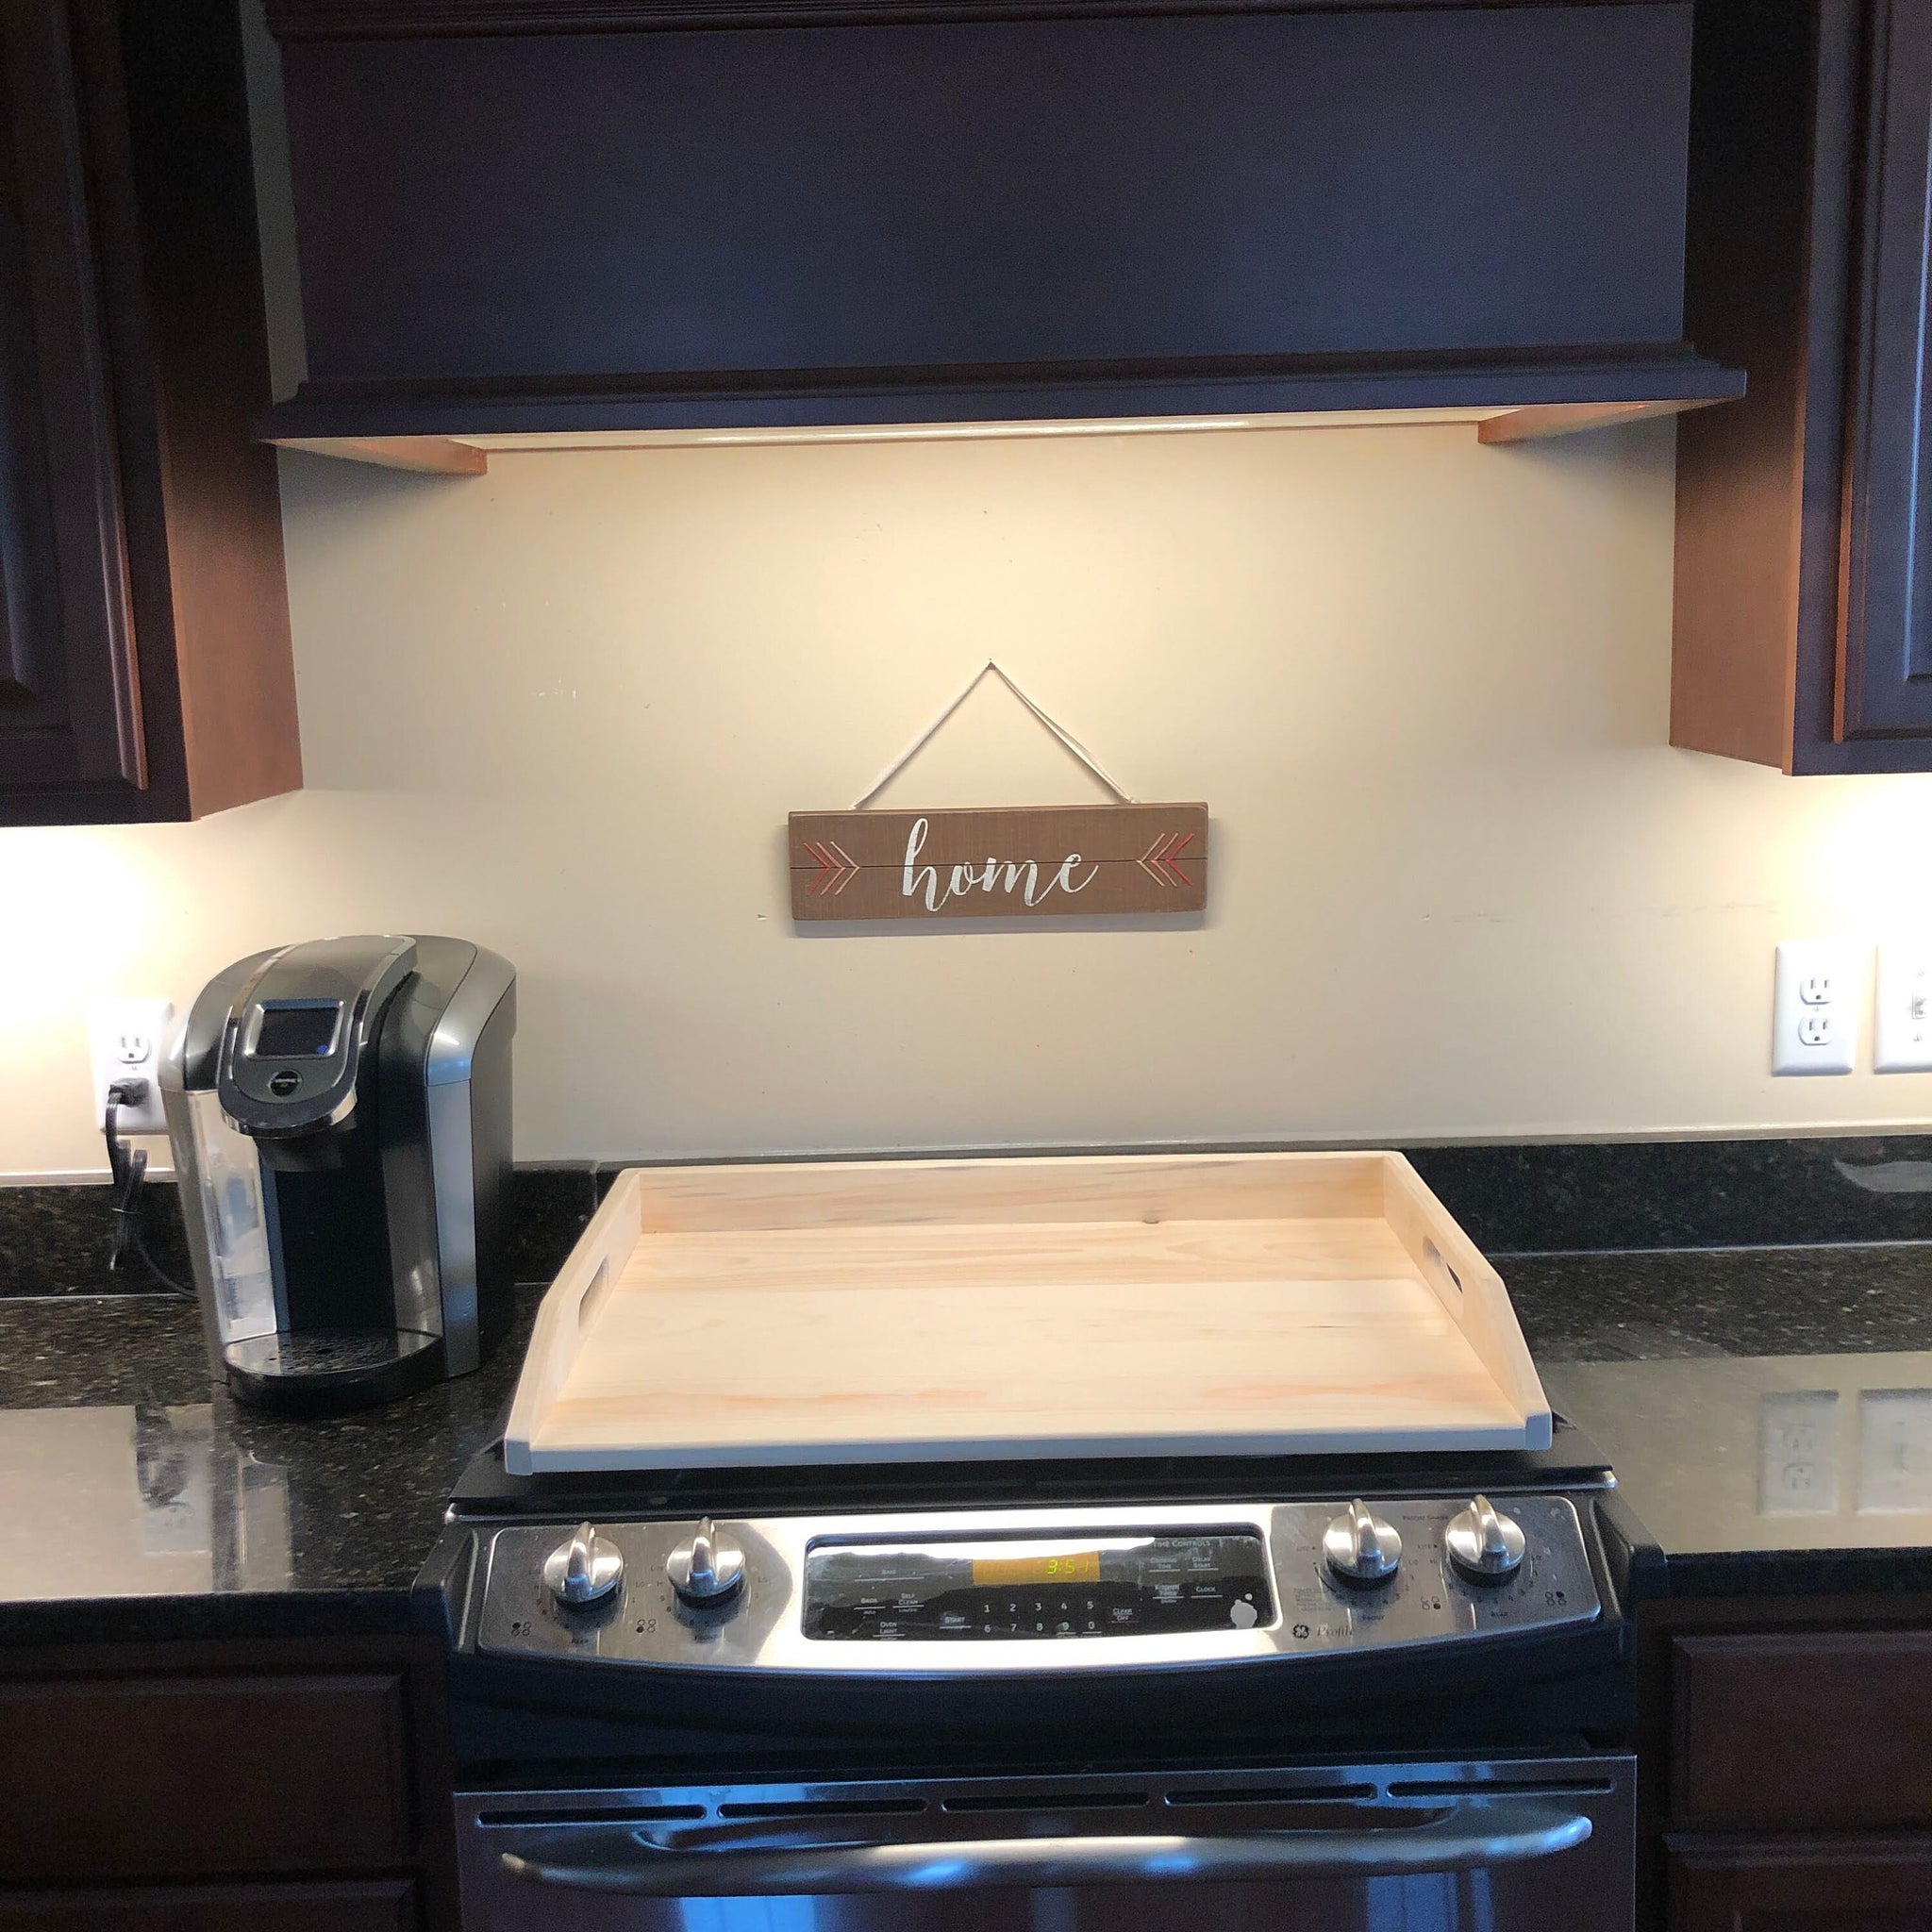 Stove Top Oven Cover, Unfinished Wood Tray Handles